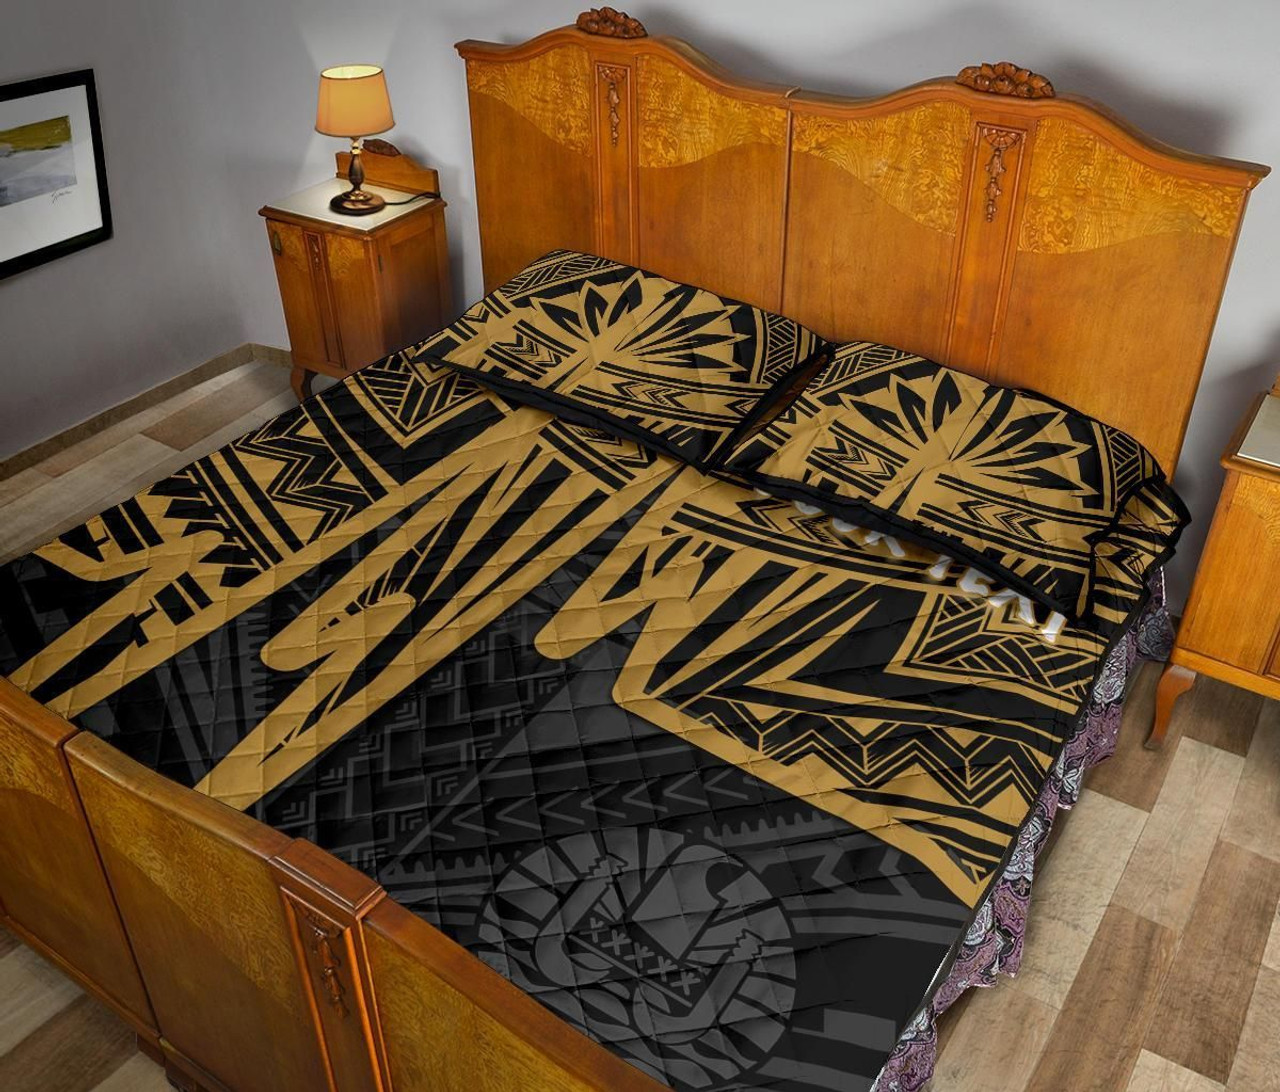 Tahiti Personalised Quilt Bed Set - Tahiti Seal In Heartbeat Patterns Style (Gold) 4